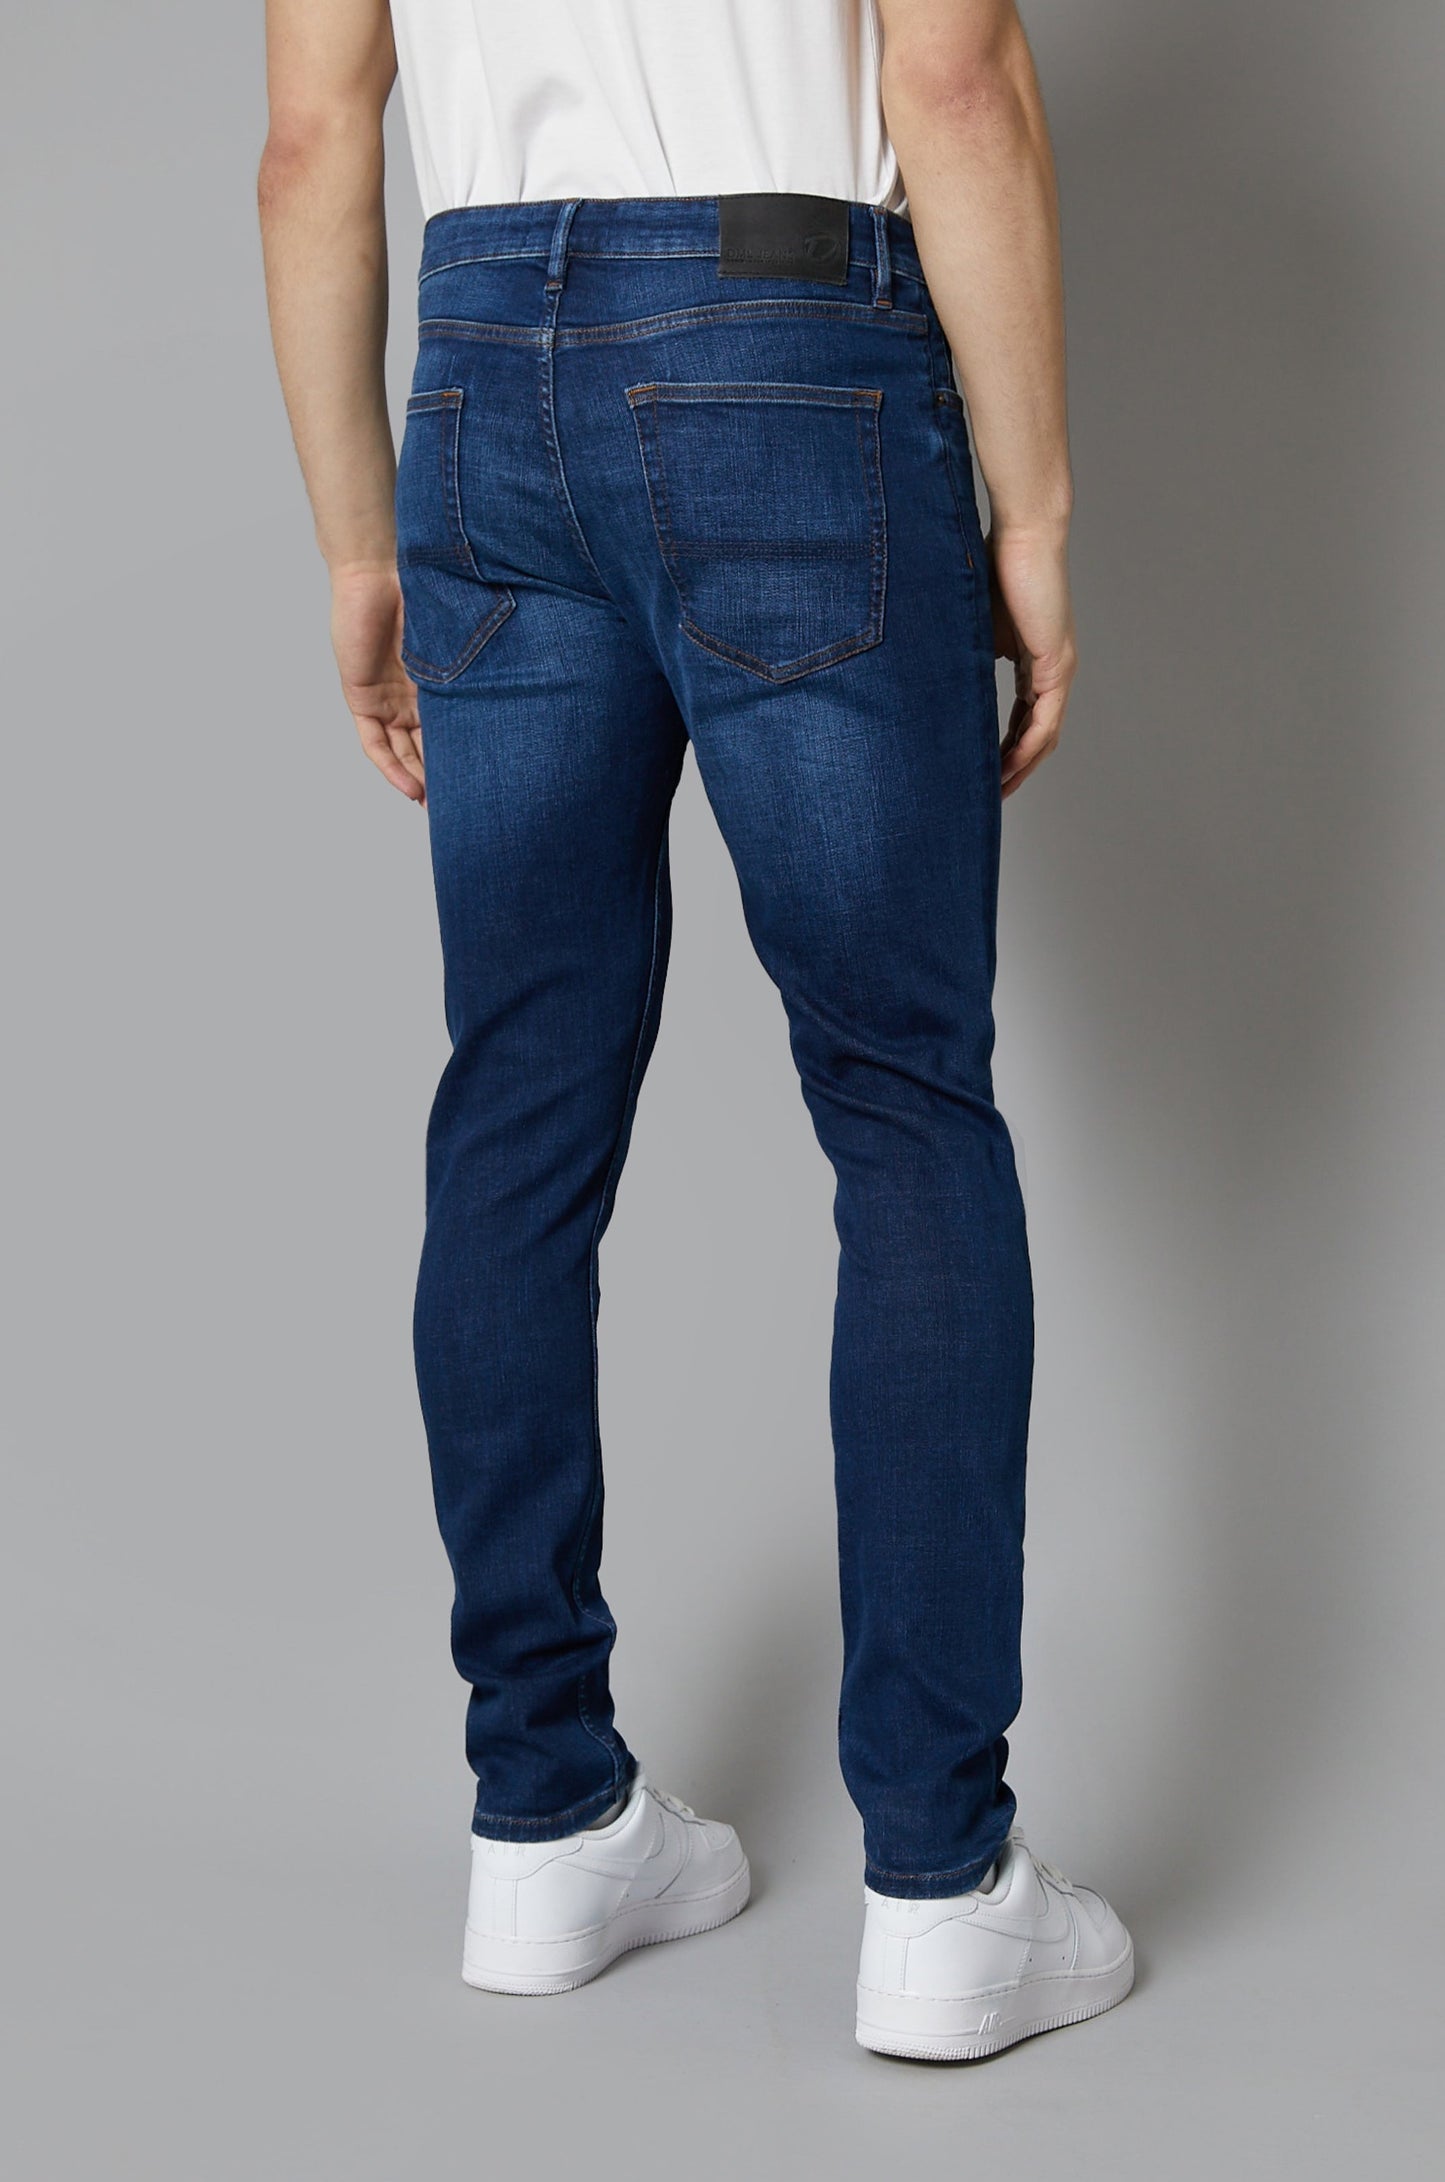 Florida Tapered Fit Jeans In Dark Blue - DML Jeans 